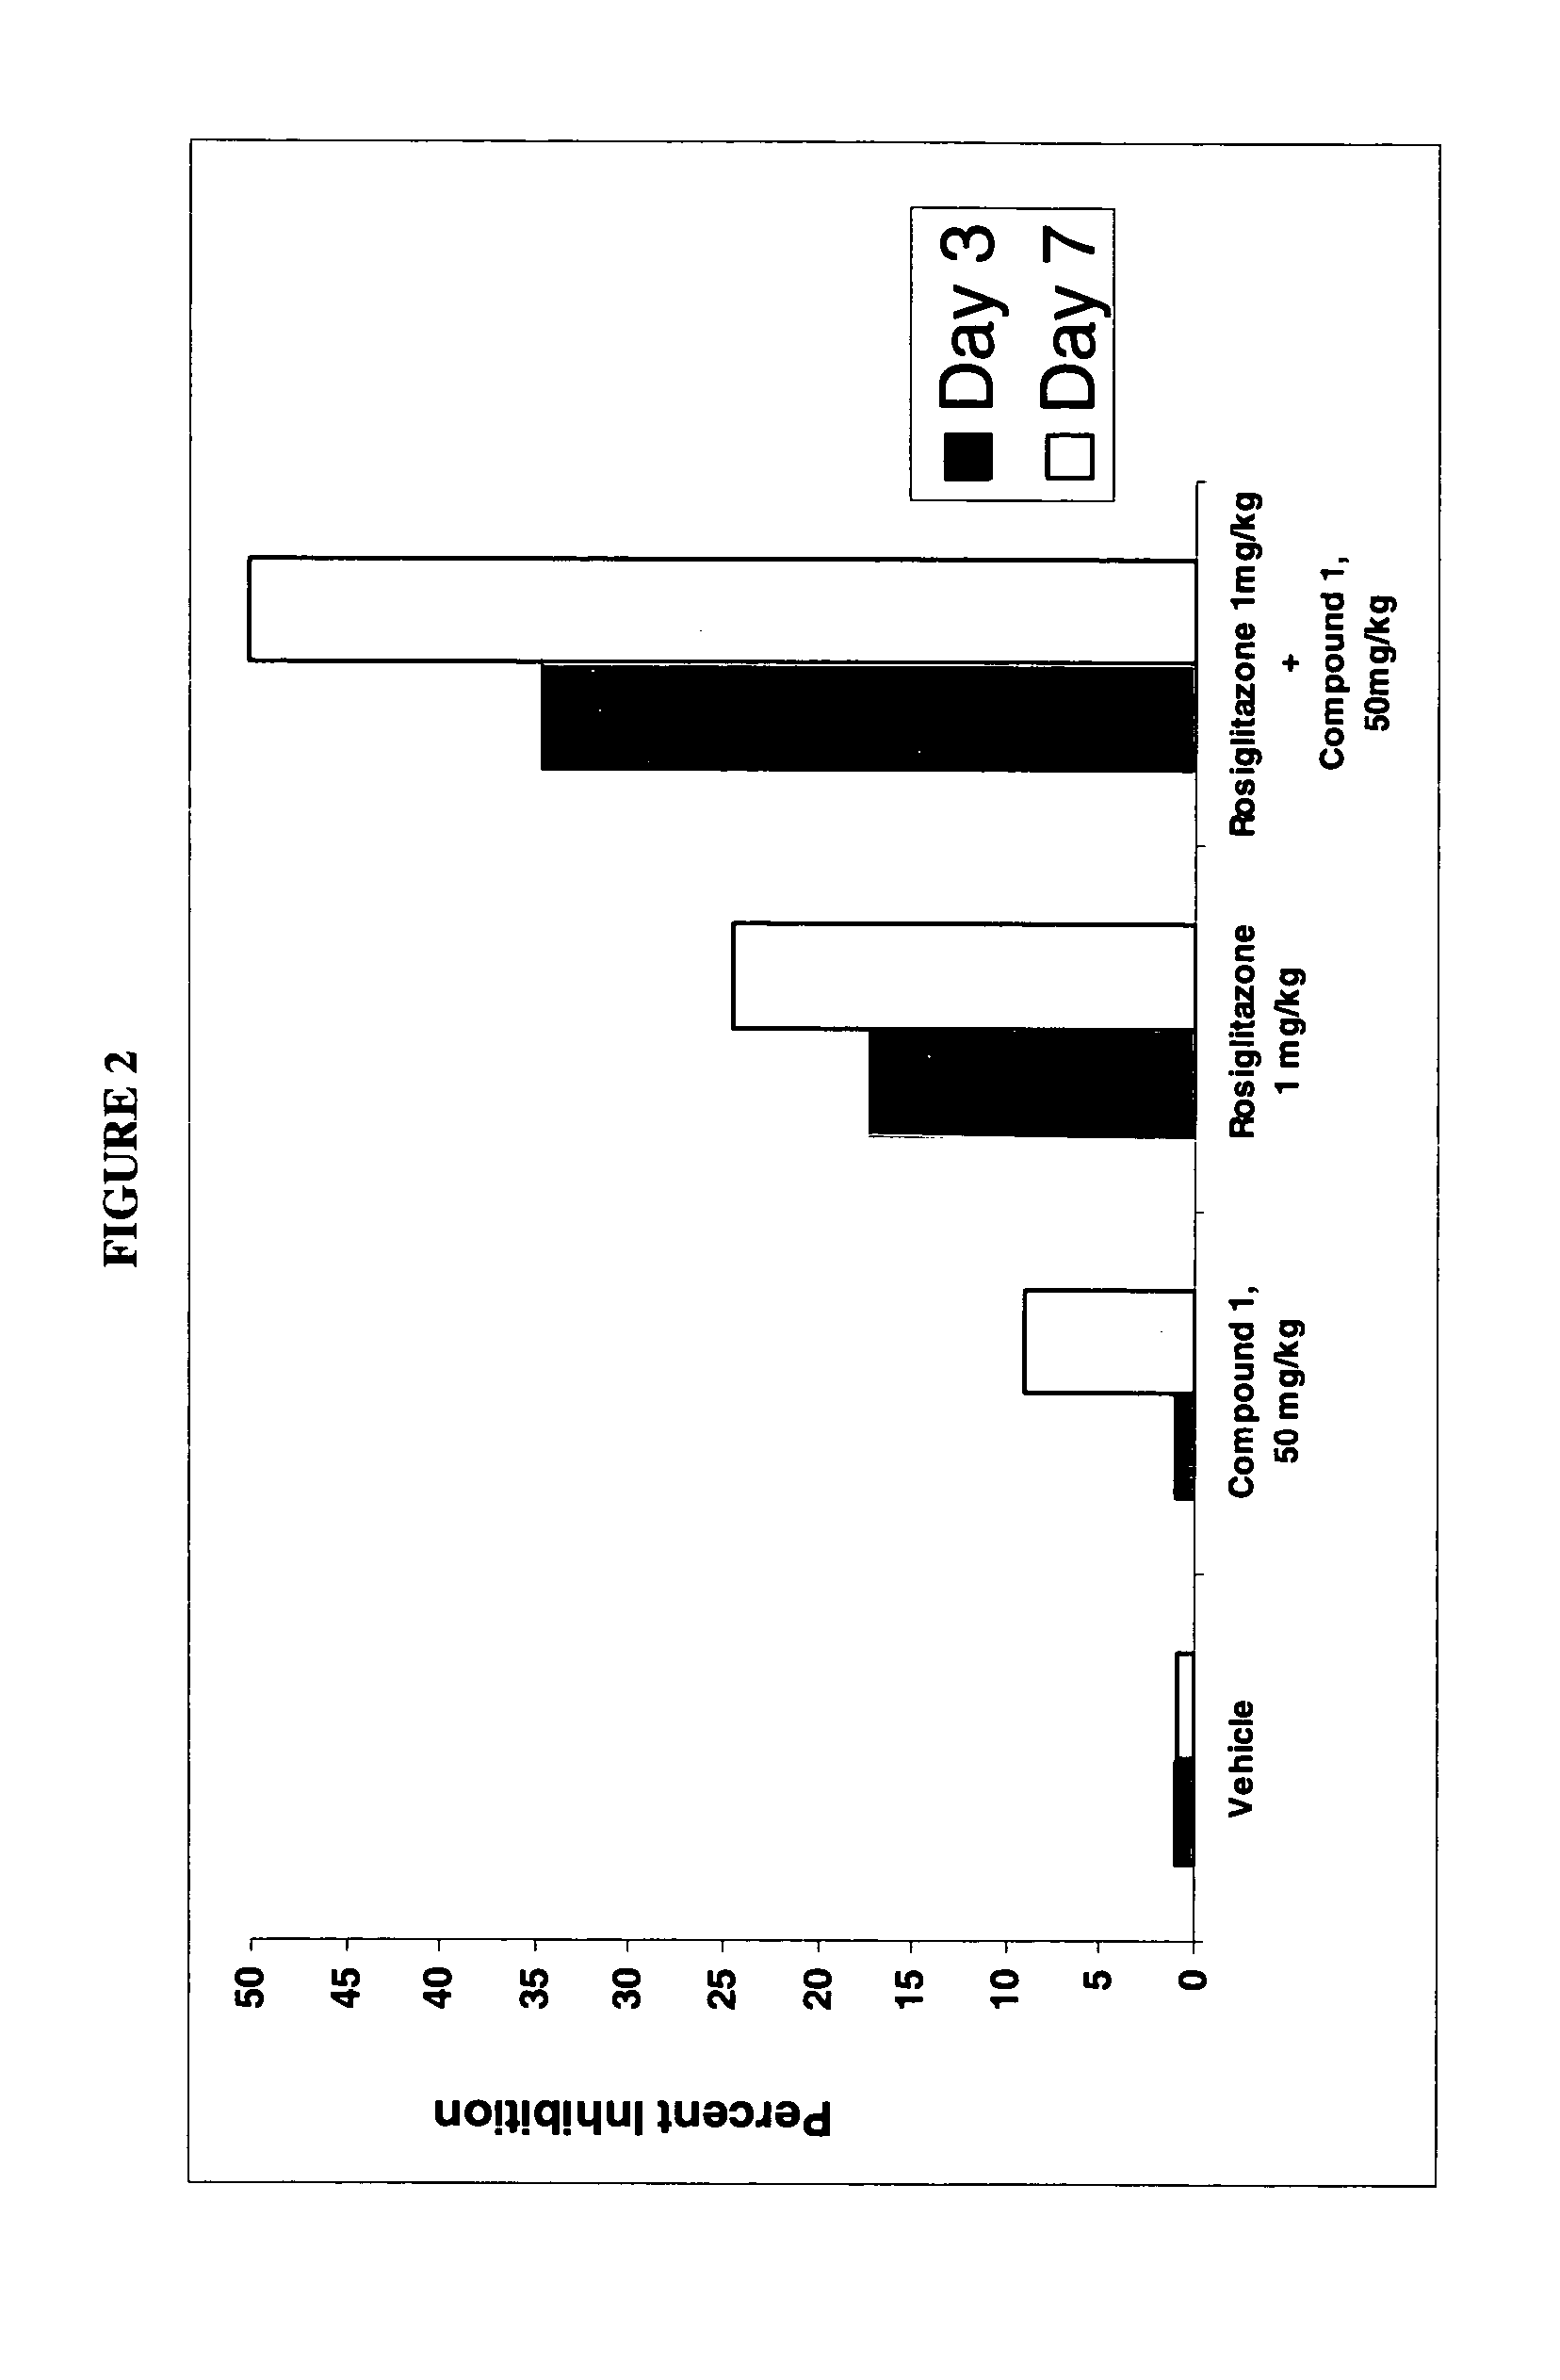 Dihydropyridine compounds for treating or preventing metabolic disorders